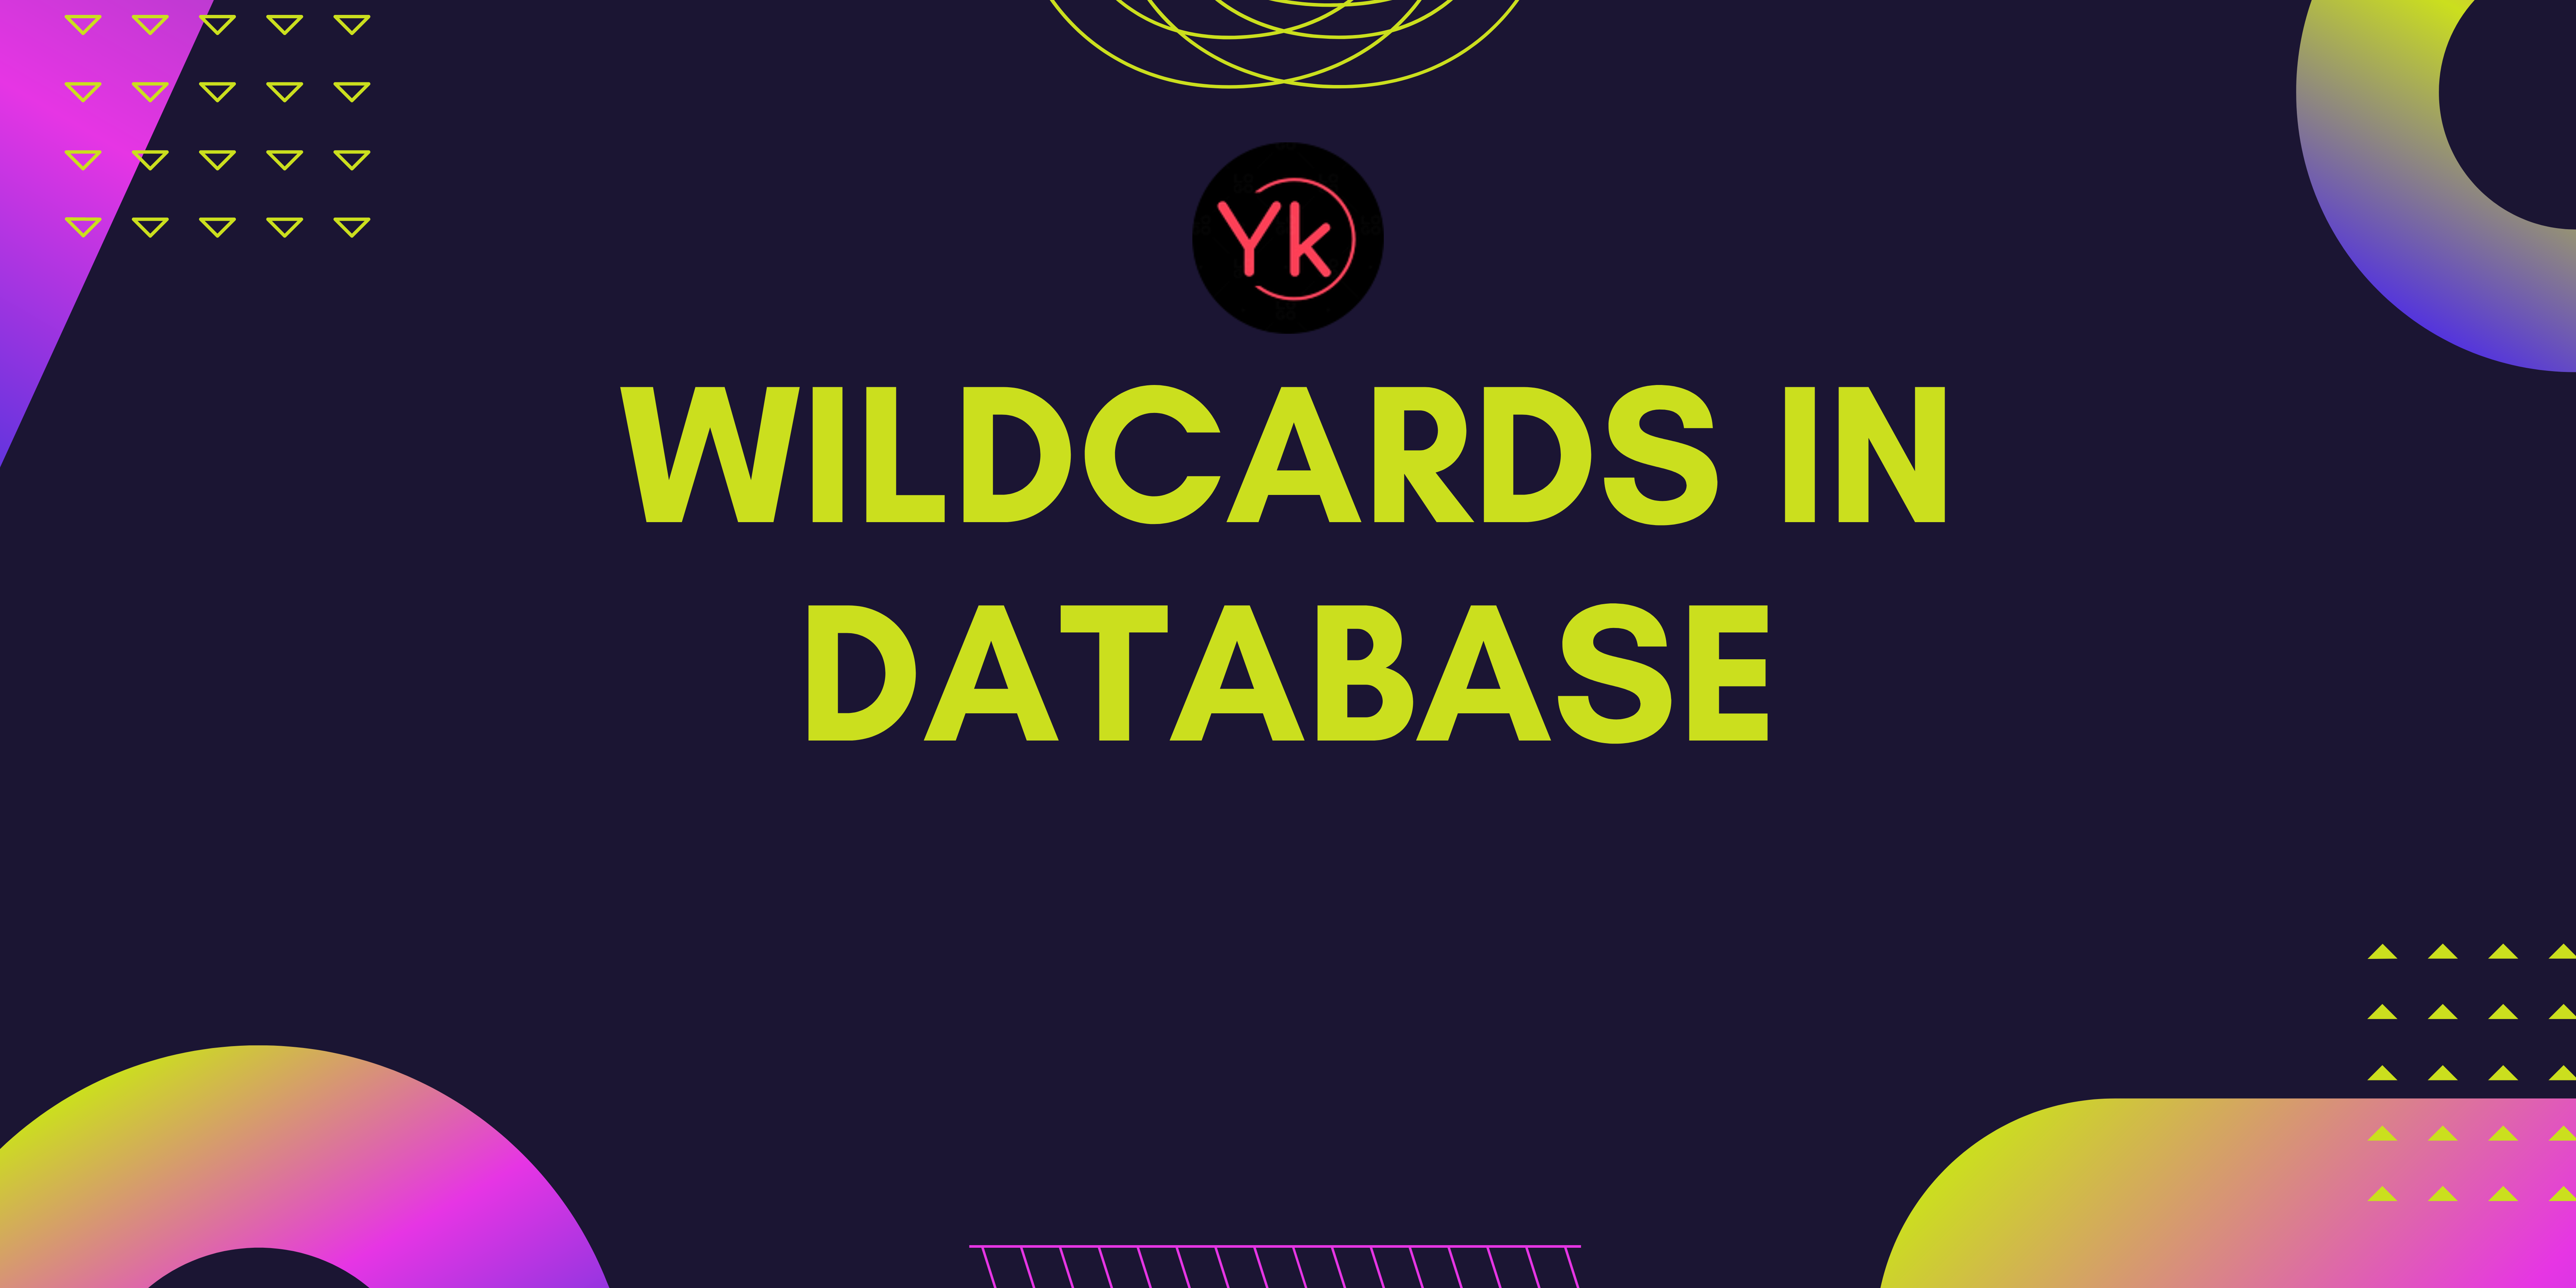 Wildcard vs. Wild Card: Which Is Correct?